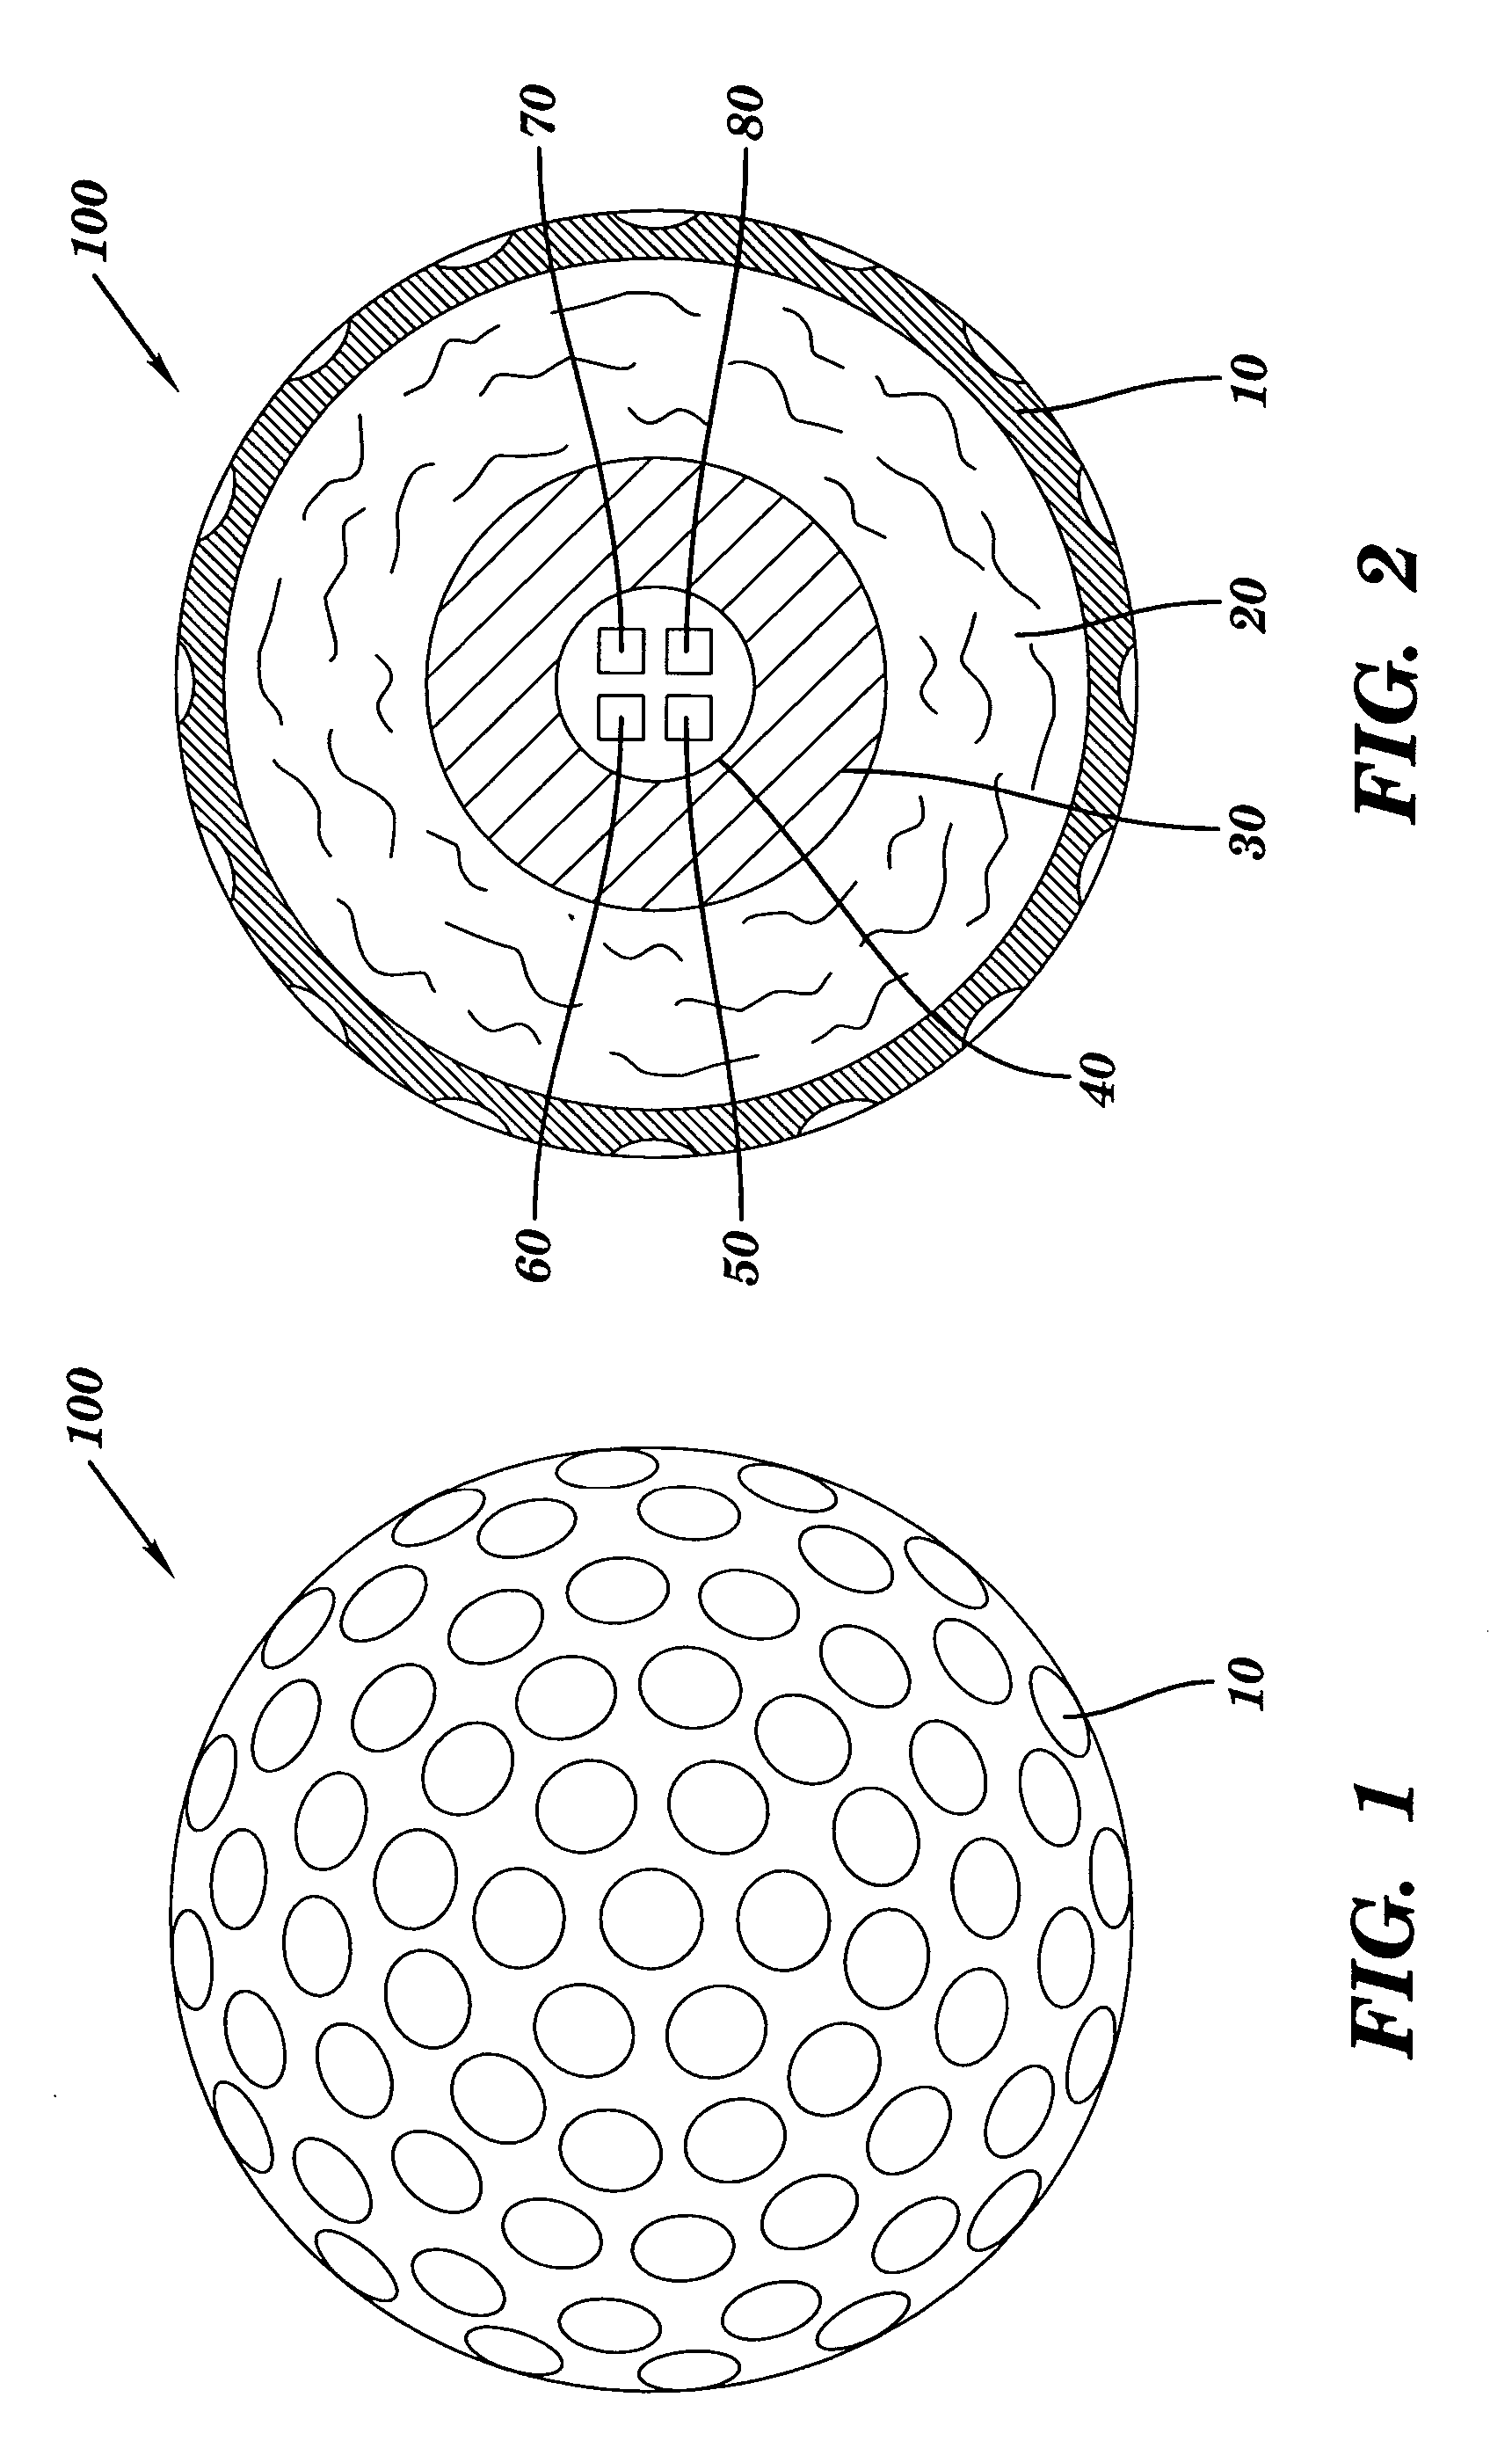 Athletic ball telemetry apparatus and method of use thereof